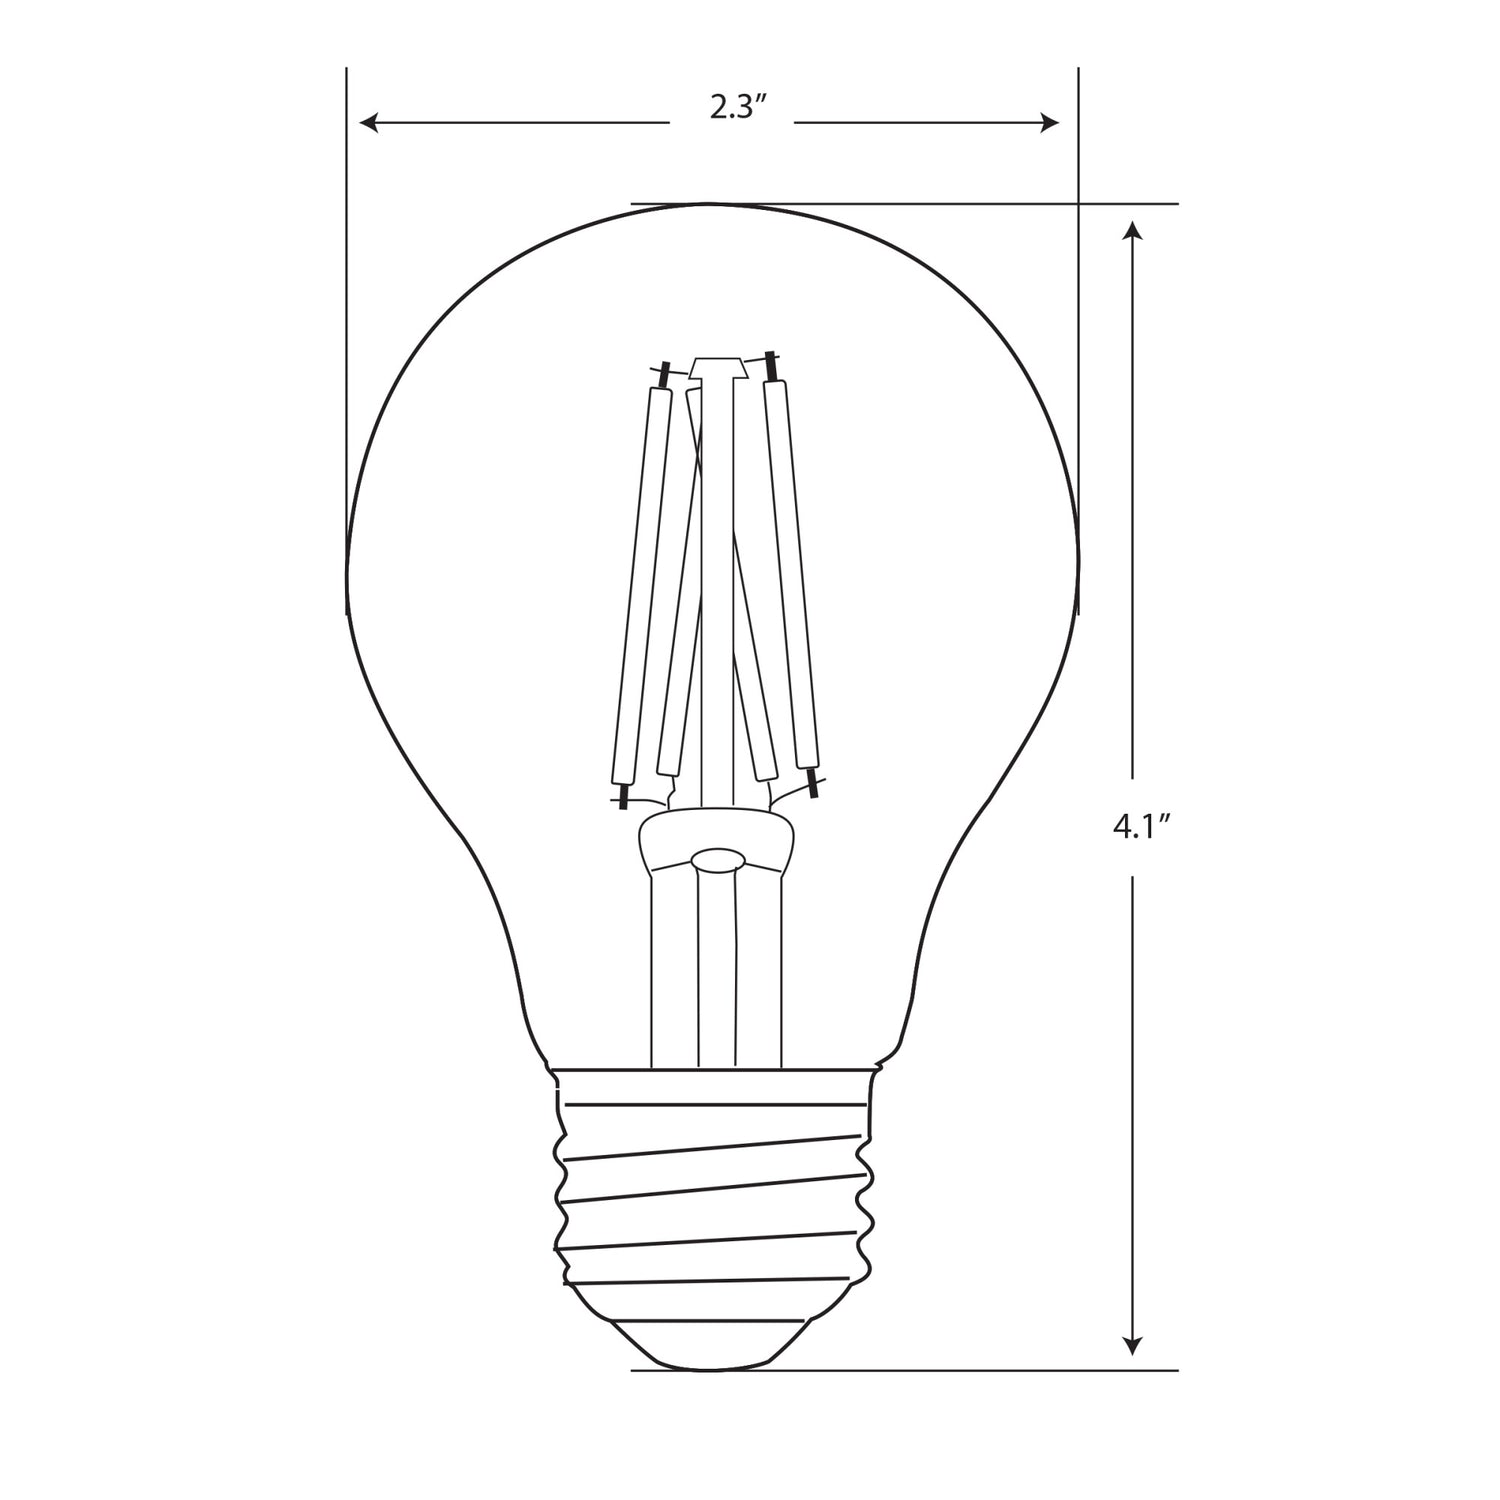 4W (25W Replacement) AT19 E26 Dimmable Straight Filament Smoke Glass Vintage Edison LED Light Bulb, Daylight